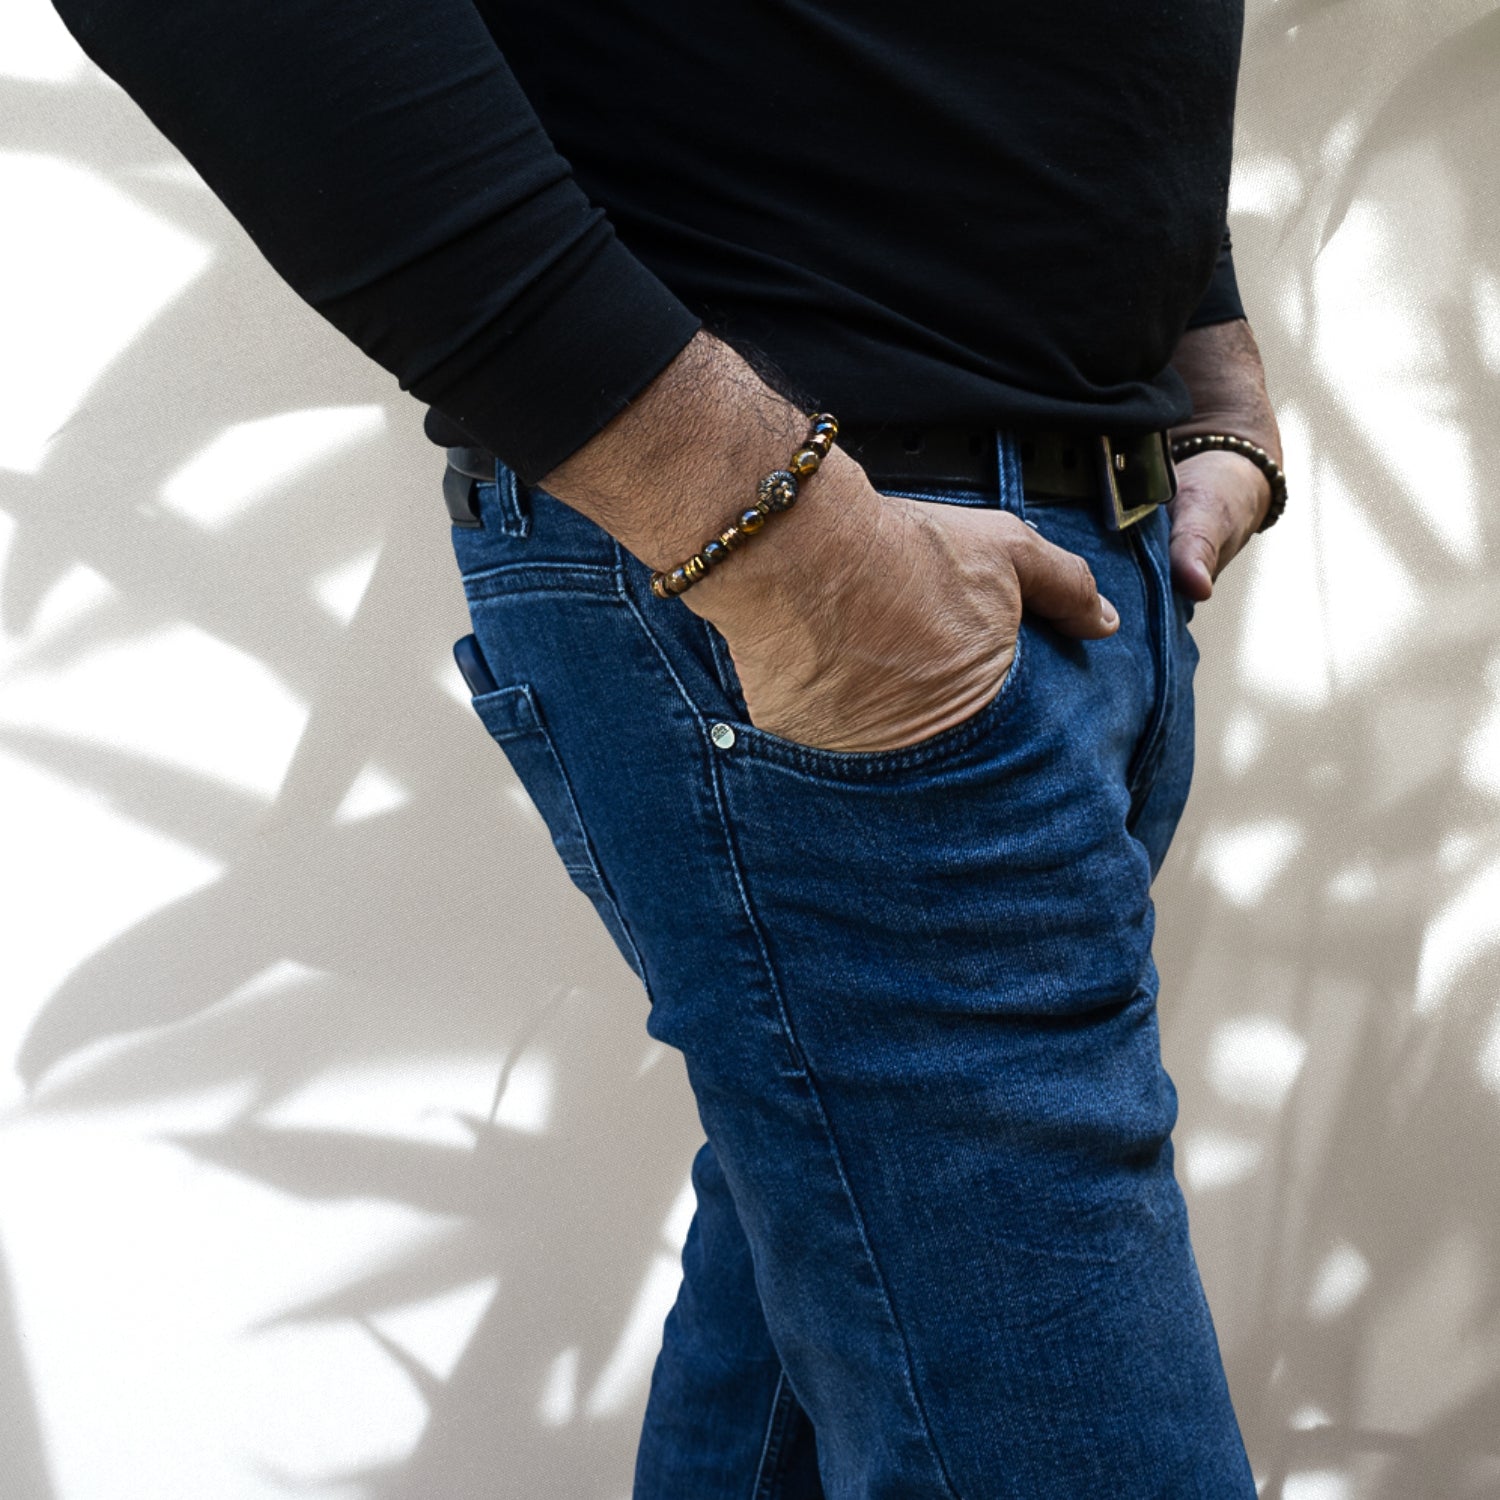 Model wearing the Lion Men Bracelet, showcasing its masculine design and powerful symbolism, adding a touch of confidence and style to any outfit.